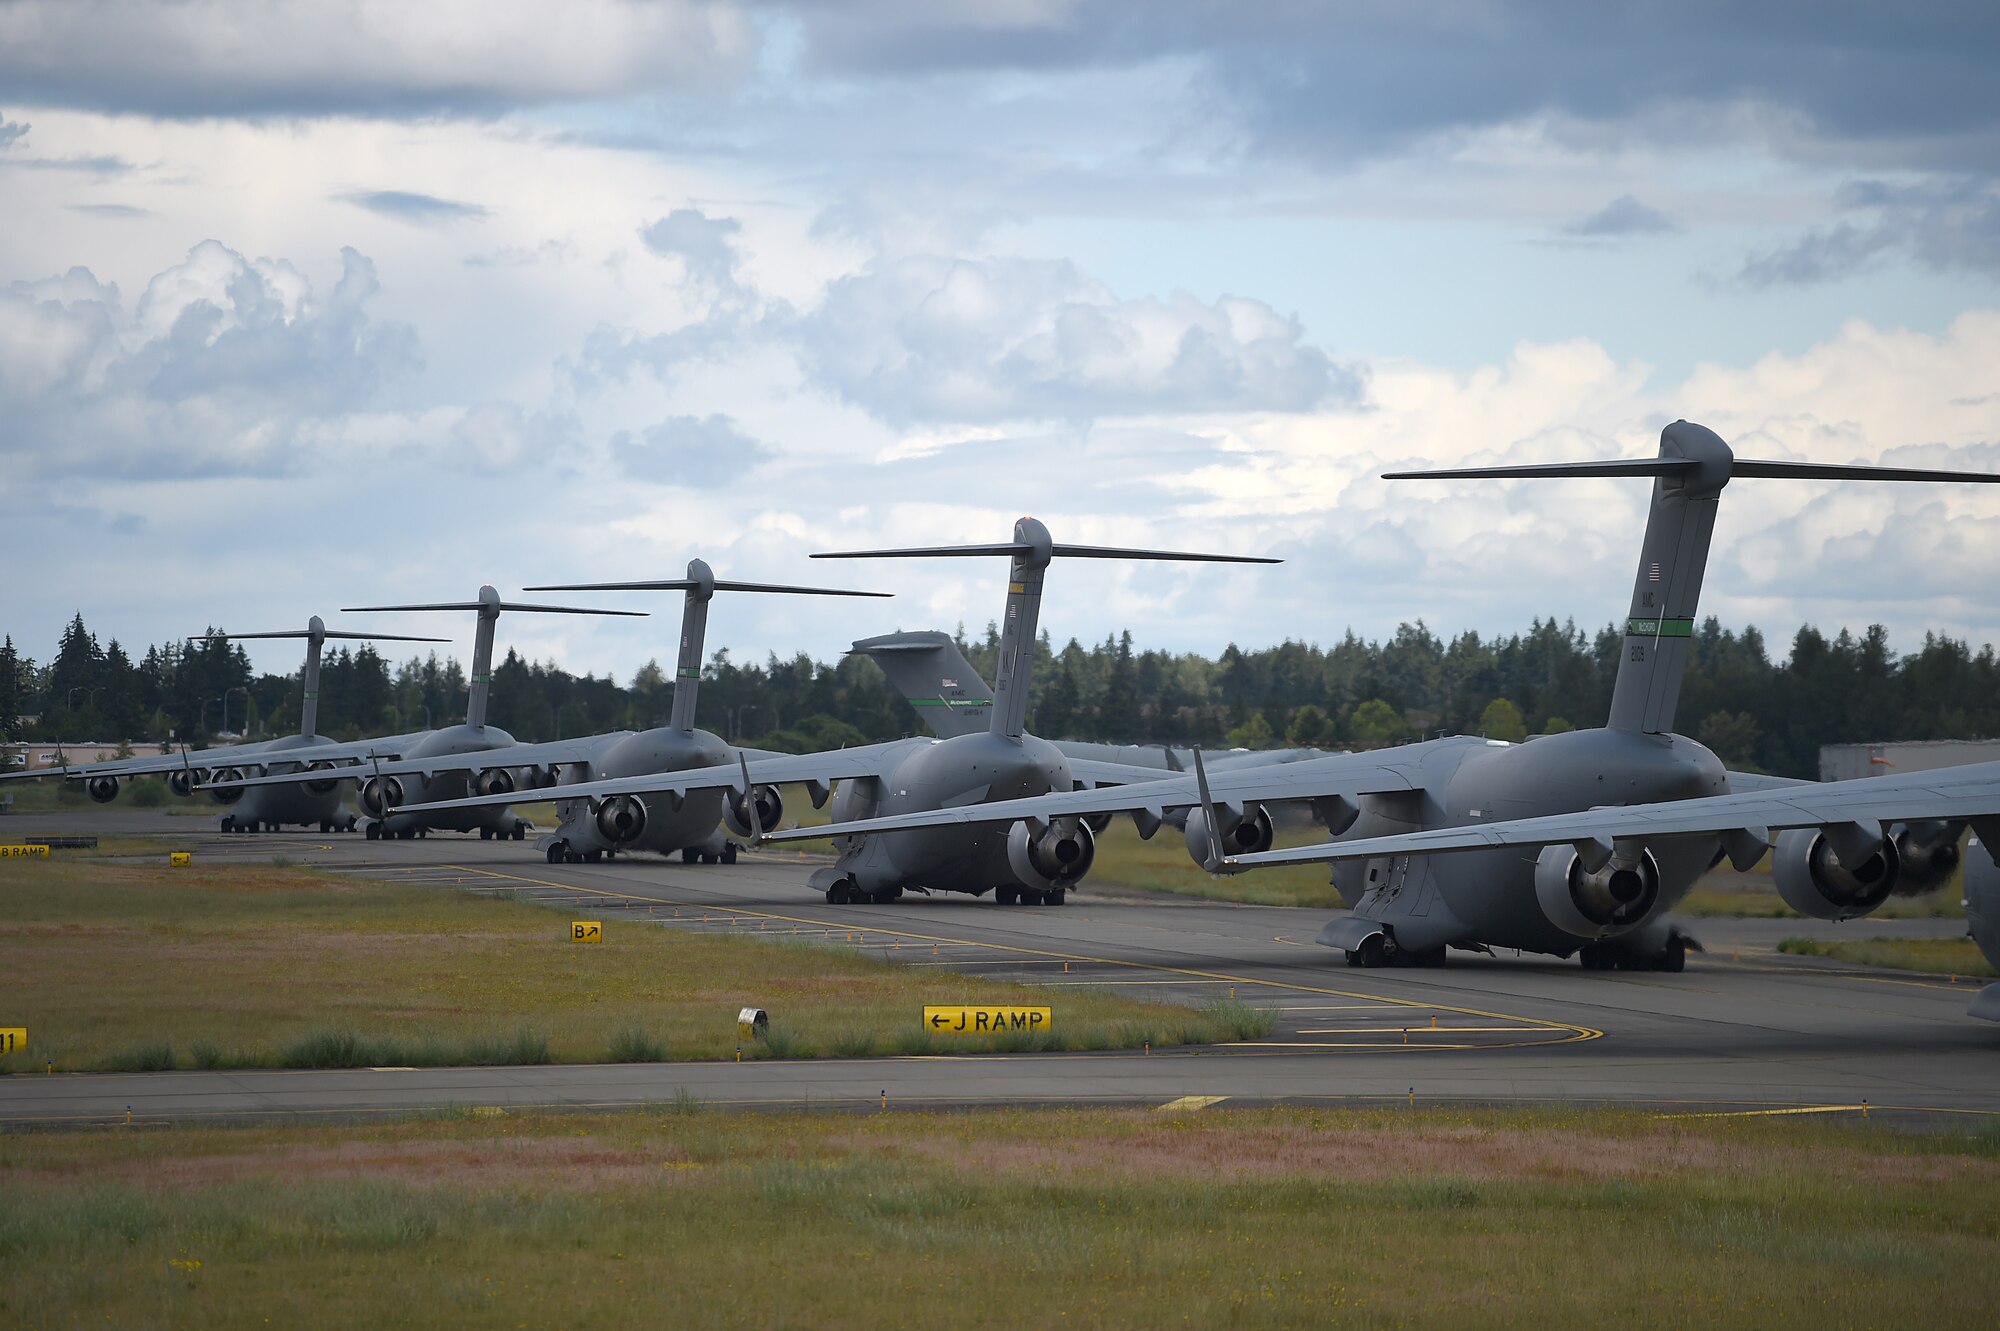 A formation of C-17 Globemaster IIIs from the 62nd Airlift Wing, 446th Airlift Wing, and Joint Base Elmendorf-Richardson, Alaska, prepare to take off from Joint Base Lewis-McChord, Wash., June 6, 2020. These aircraft made up a small portion of the 87 total that participated in a weapons instructor course joint force training exercise over the Nevada Test and Training Range. (U.S. Air Force photo by Airman 1st Class Mikayla Heineck)